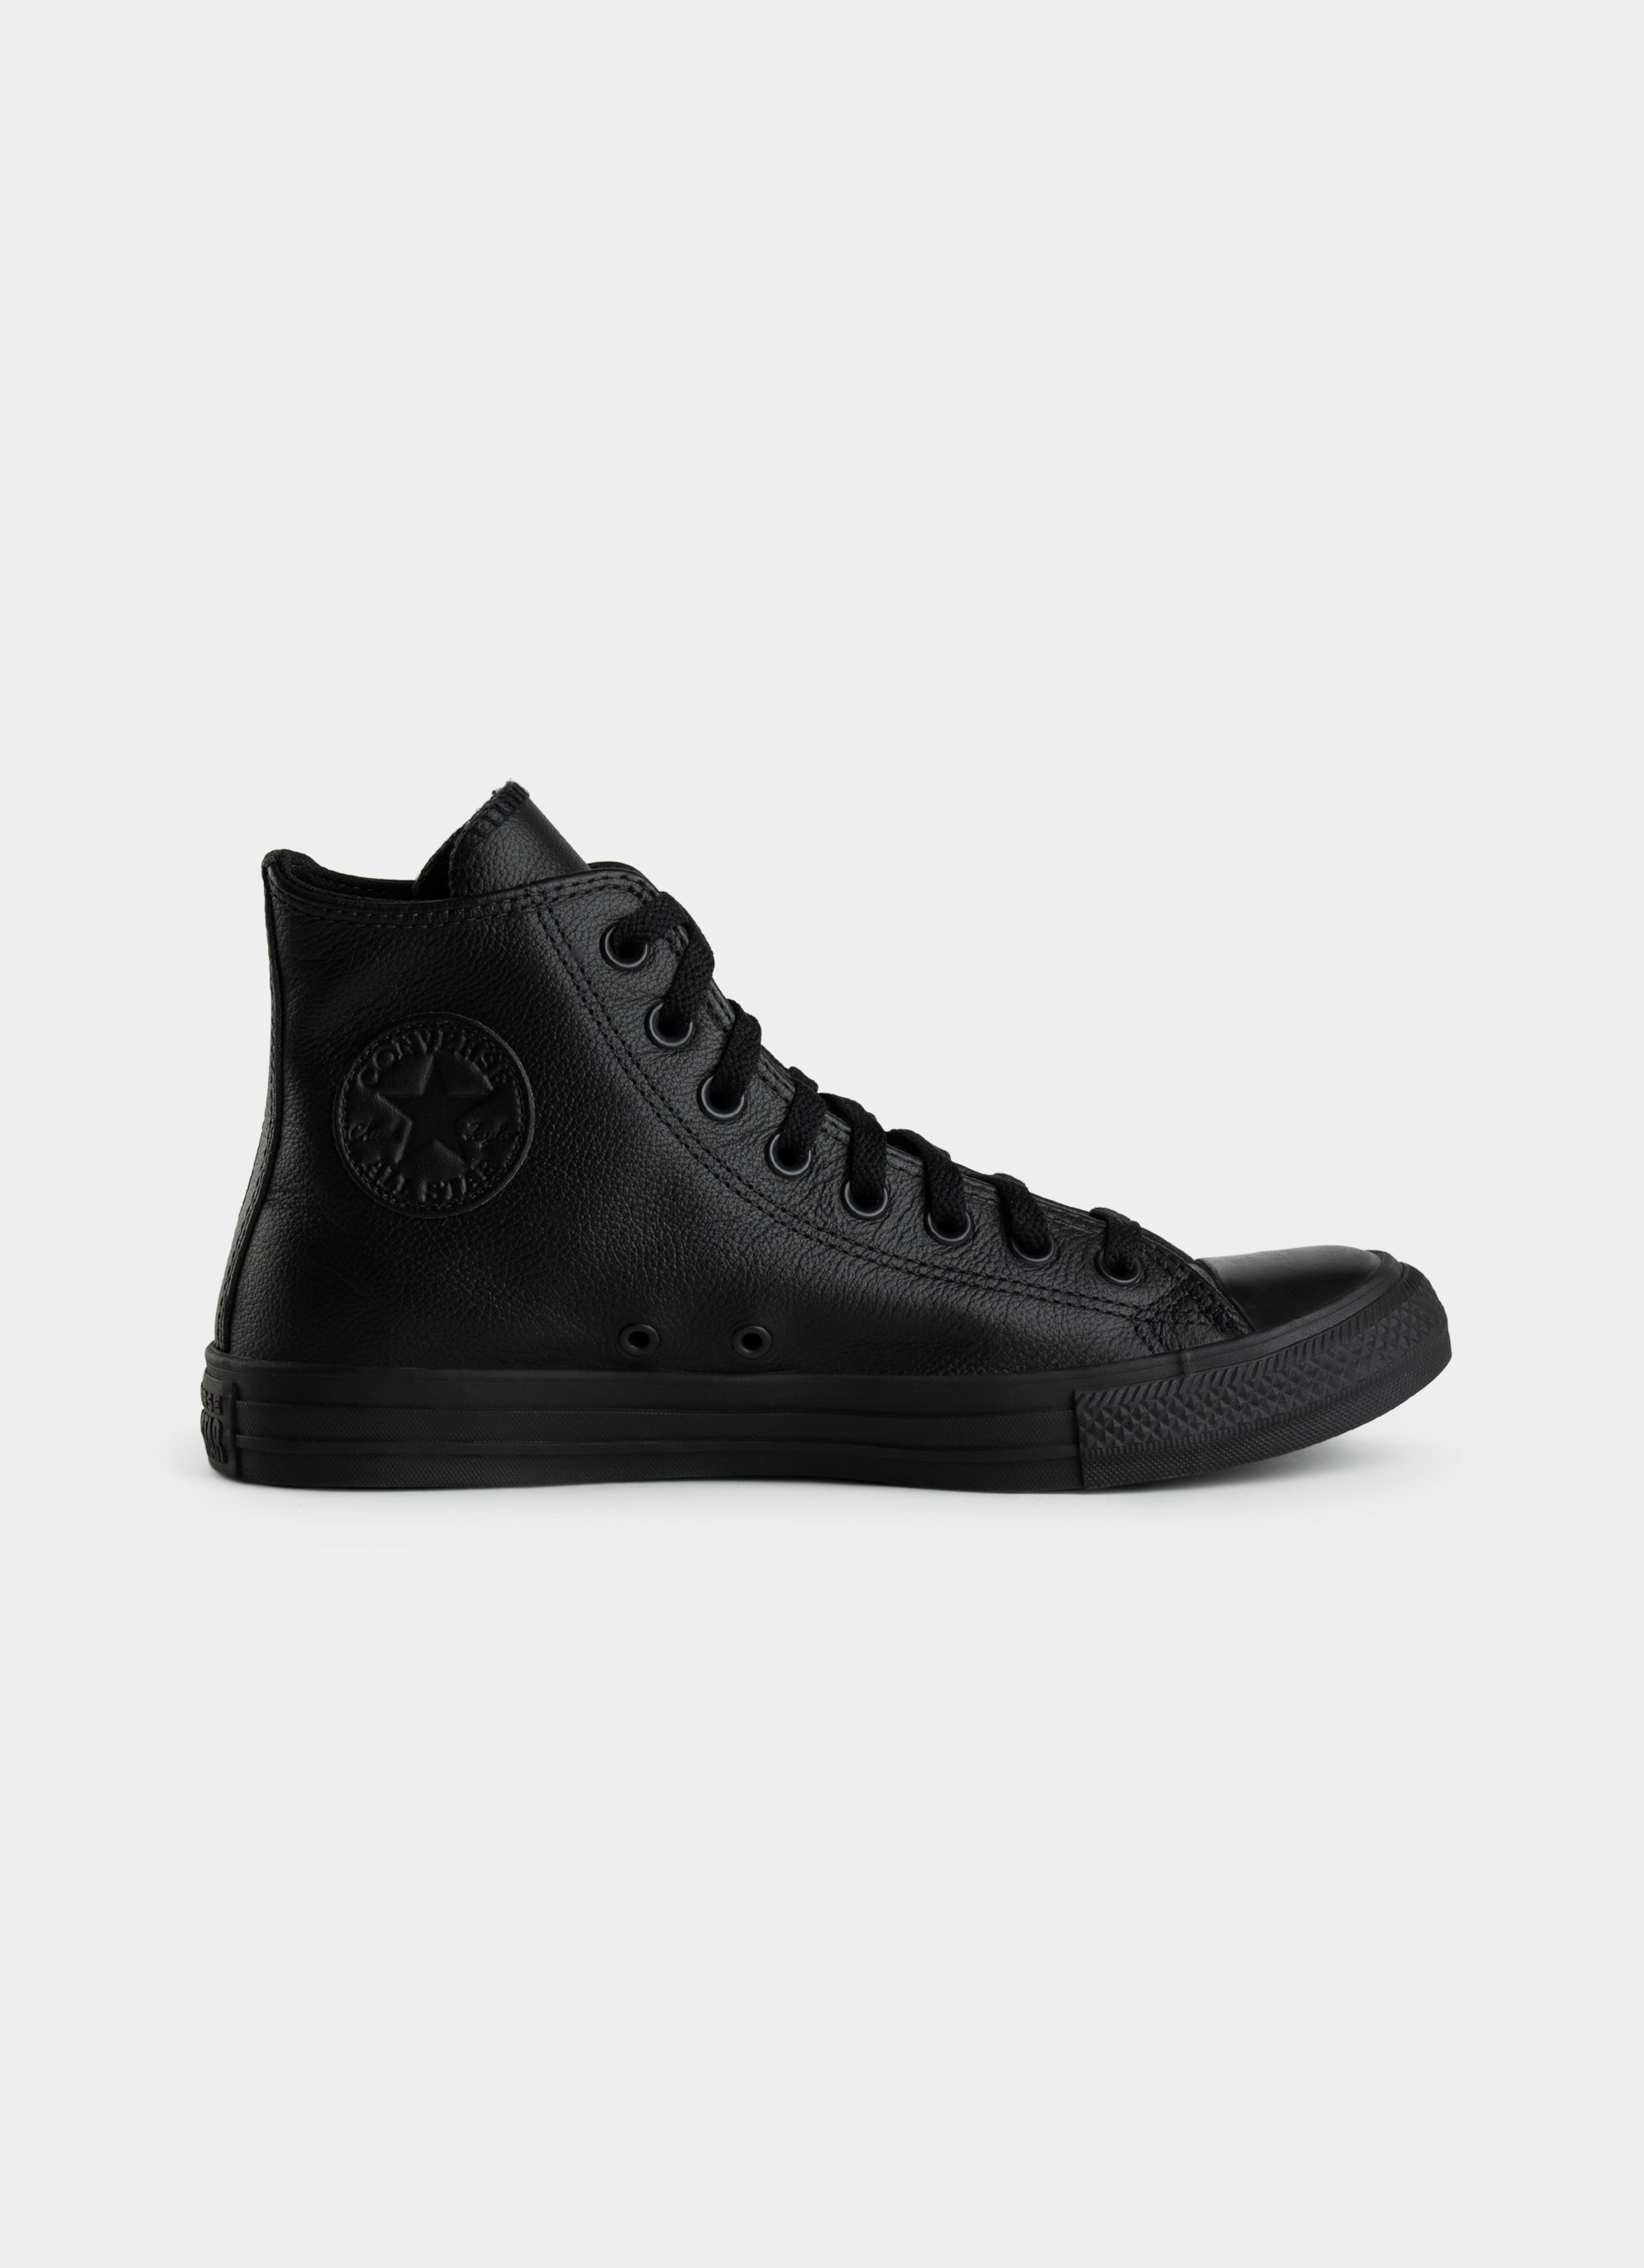 Converse Chuck Taylor High Monochrome 'leather' Shoe in Unknown | Red Rat